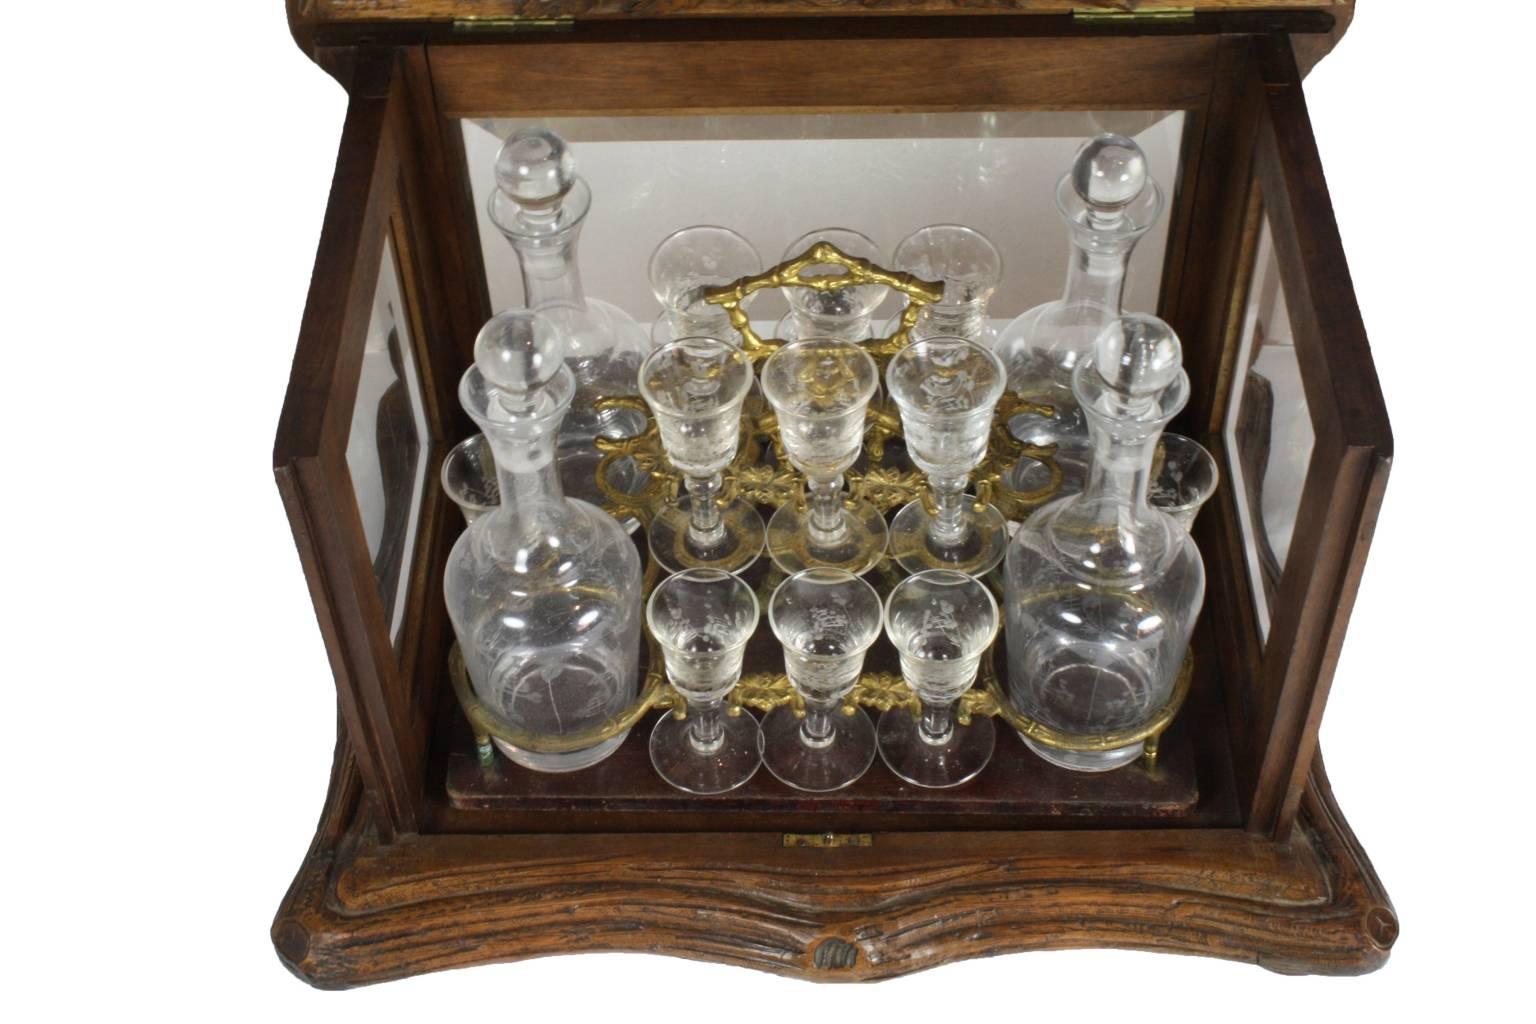 Swiss Walnut Liquor Box with Four Decanters and 16 Cordial/Aperitif Glasses In Good Condition For Sale In Evergreen, CO